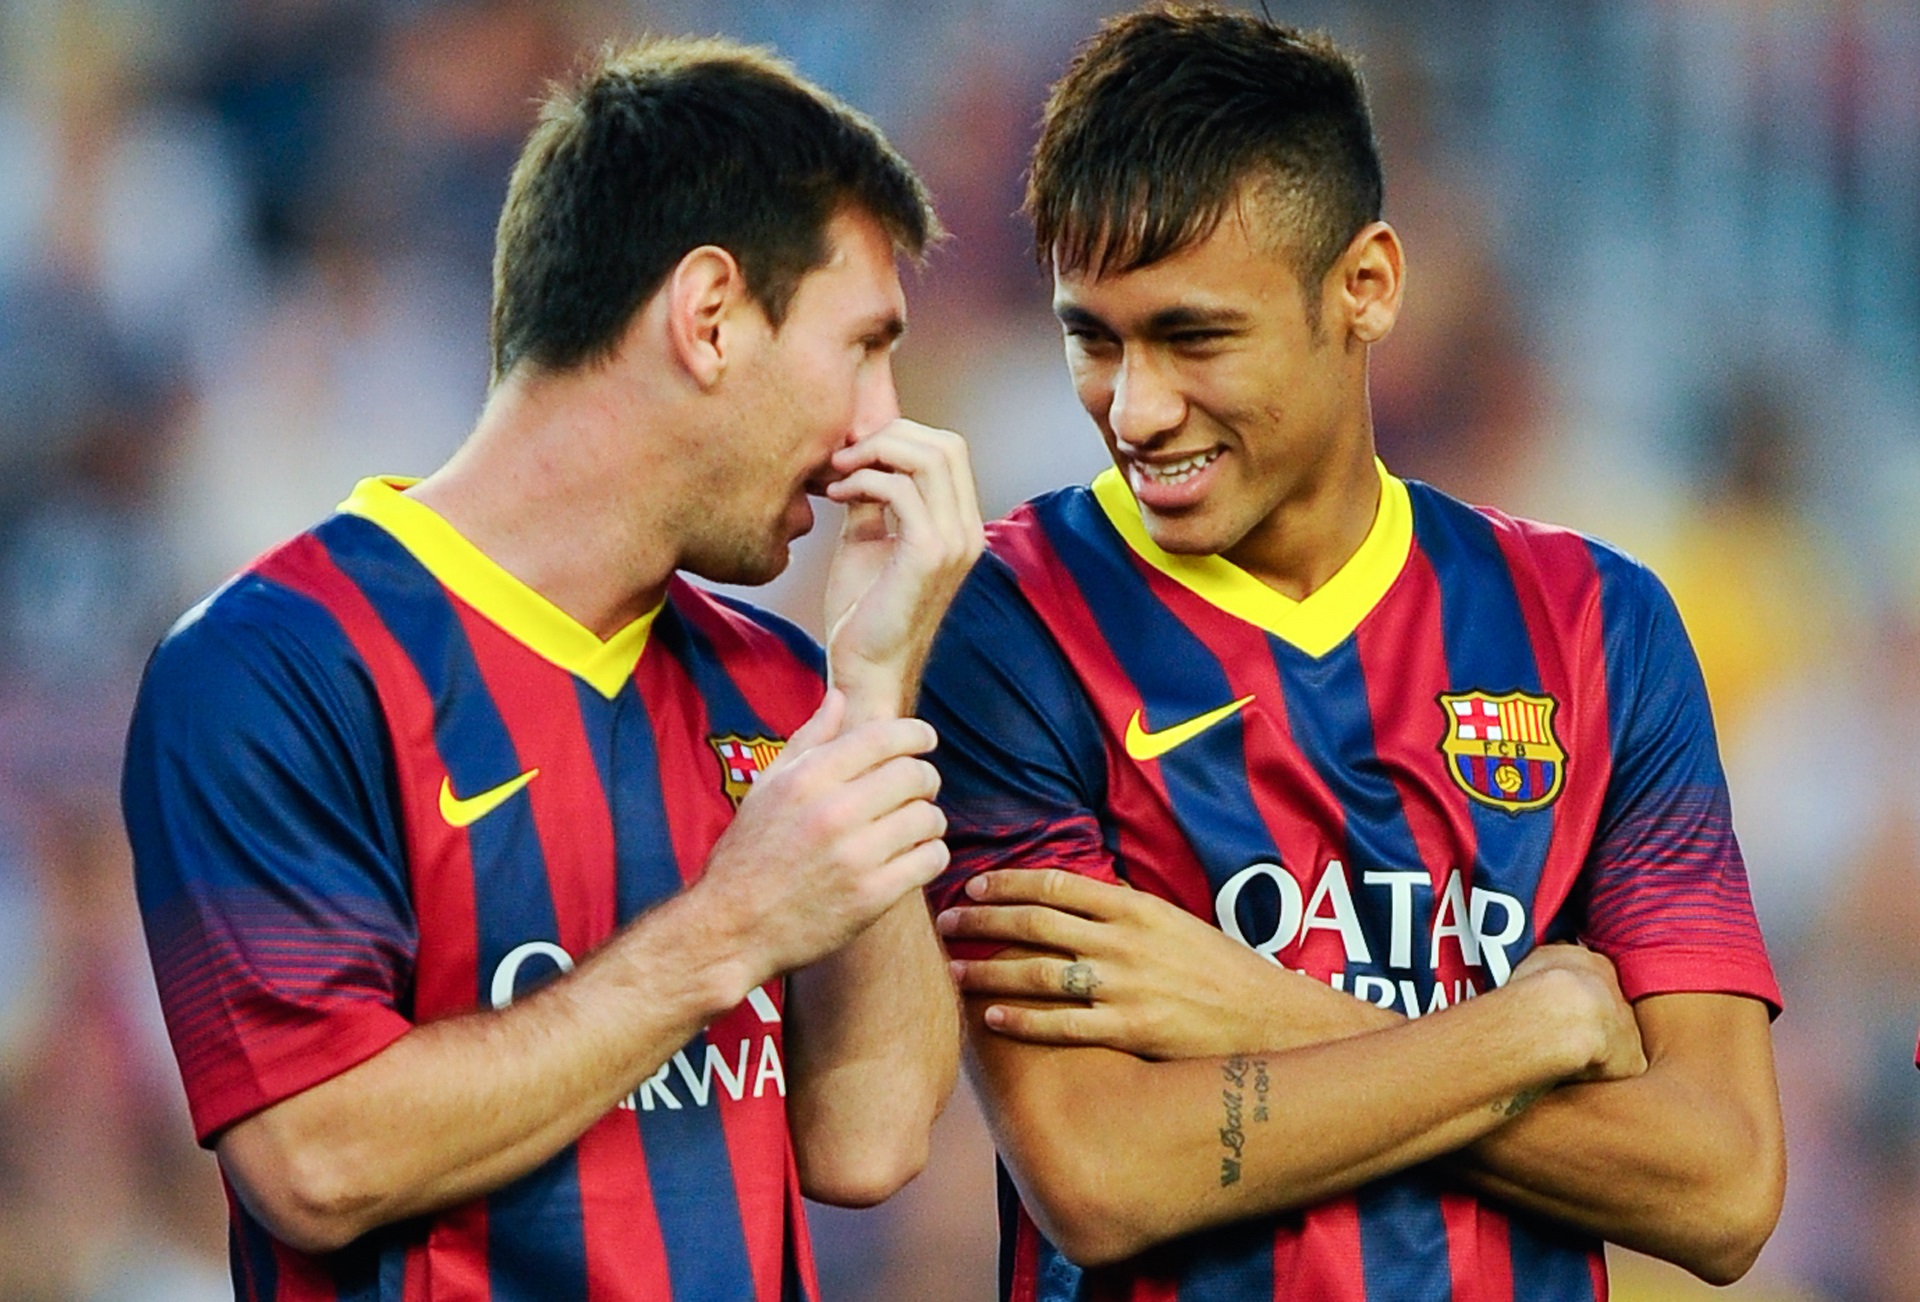 Lionel Messi and Neymar are Barcelona top paid players